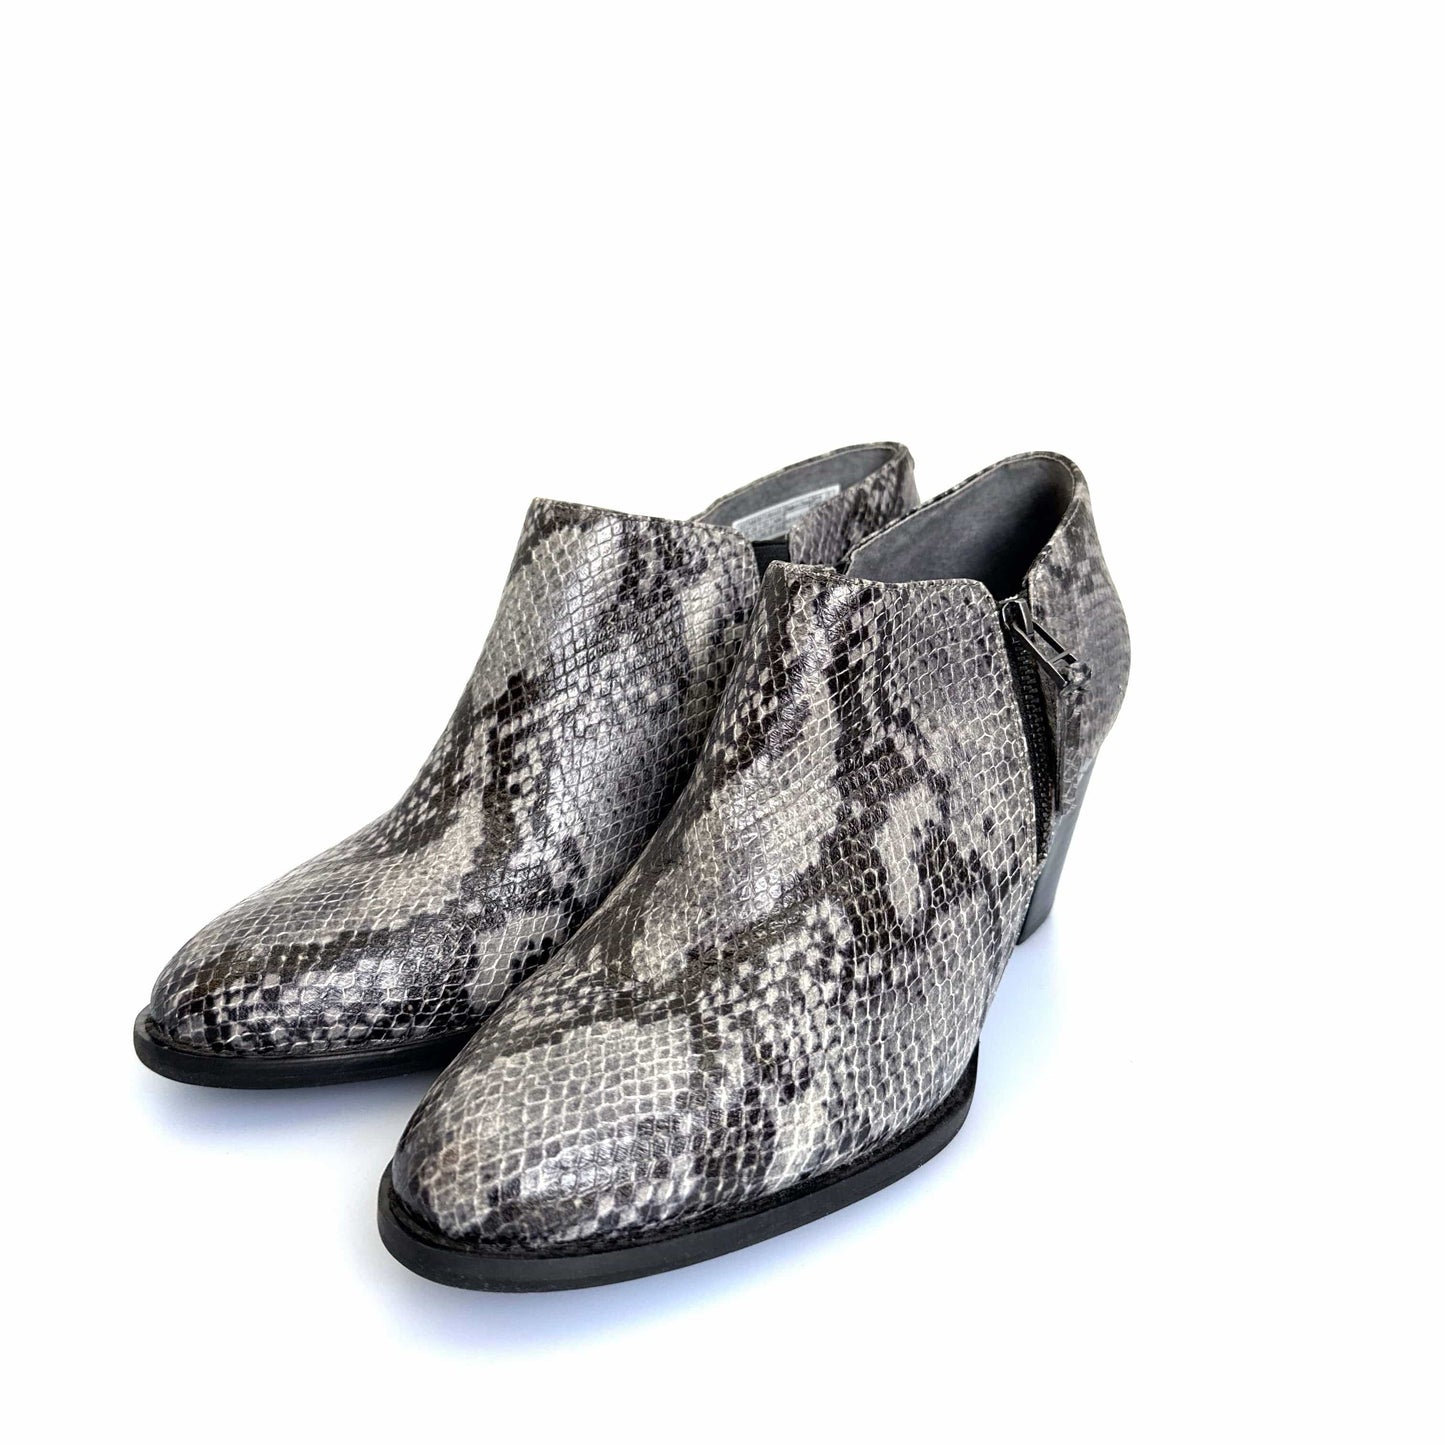 Vionic Womens Size 9.5 Gray Snakeskin 'Taber' Booties Side-Zip, Pre-Owned